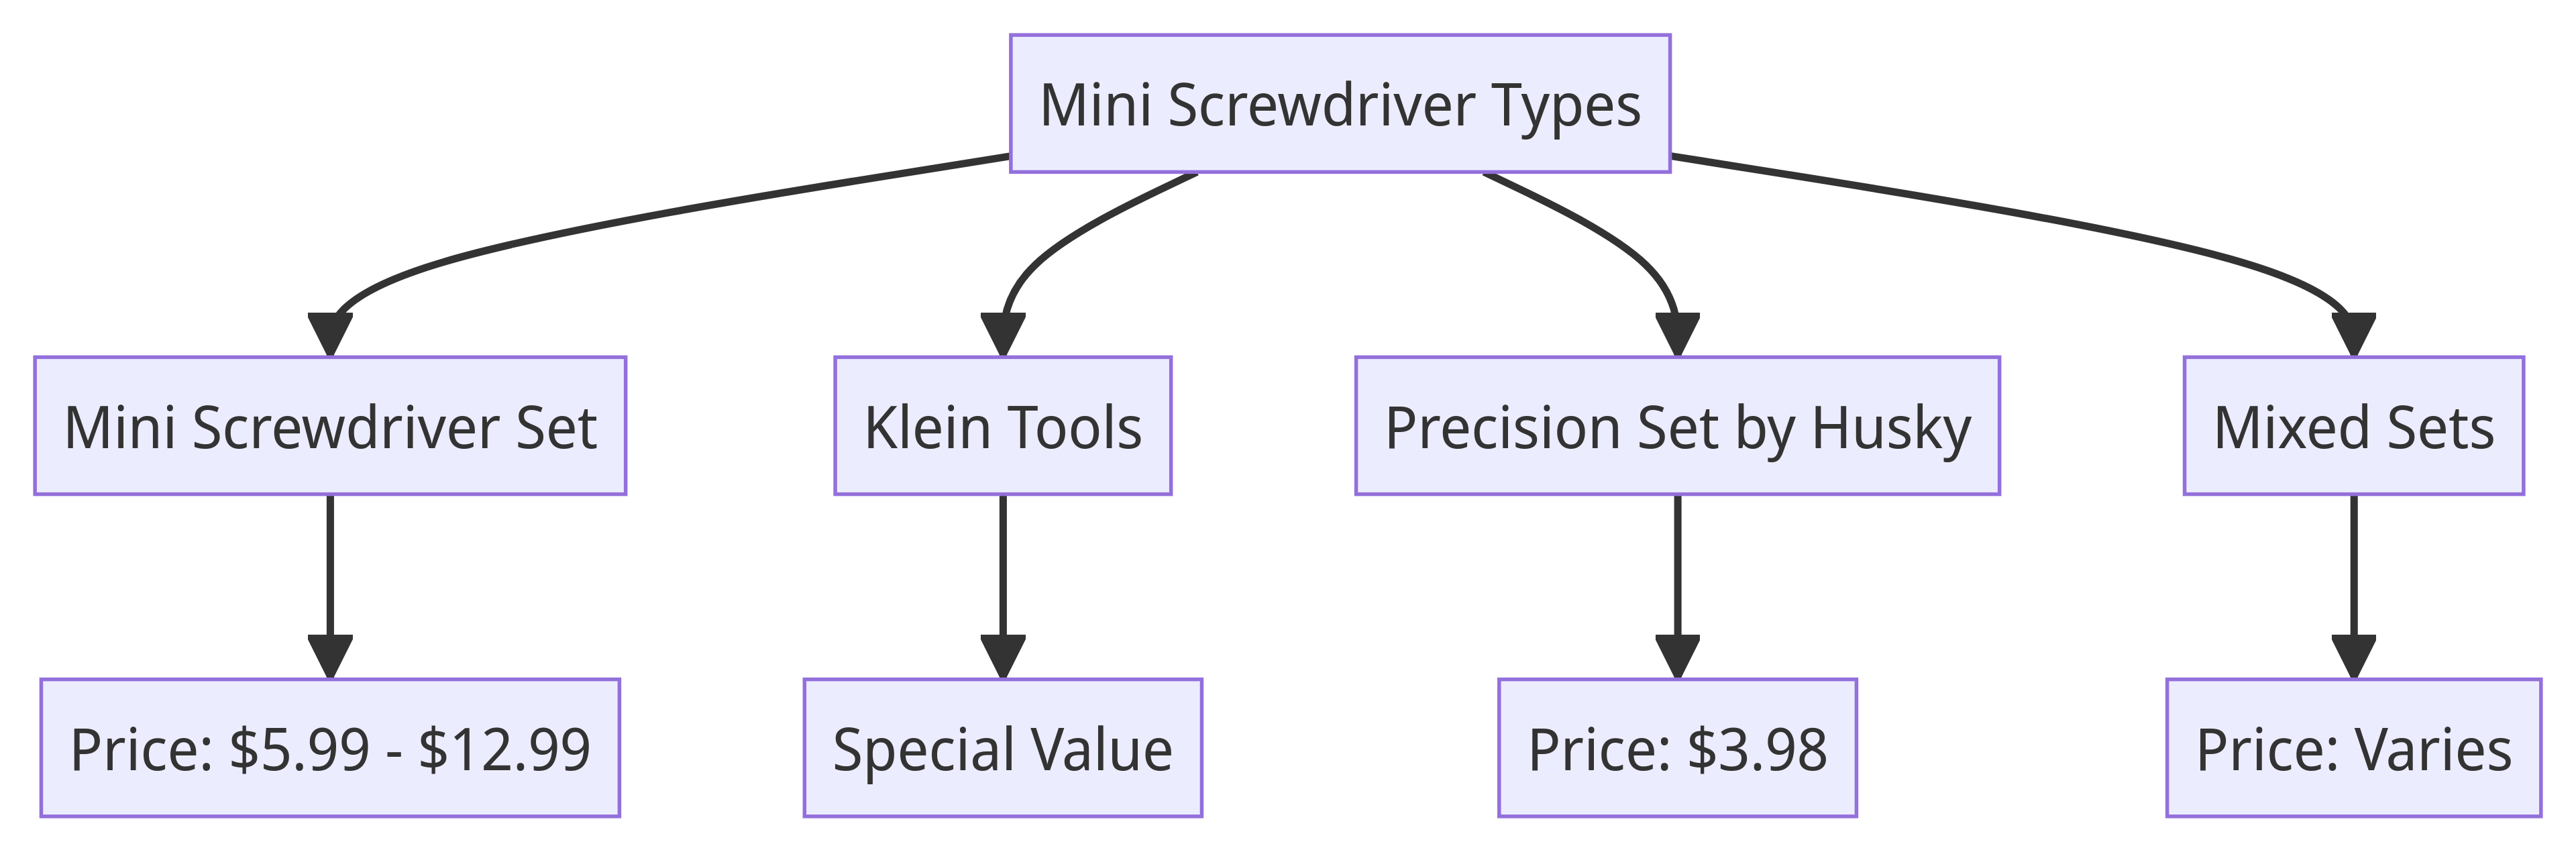 Flow Chart of Mini Screwdriver Types and Prices